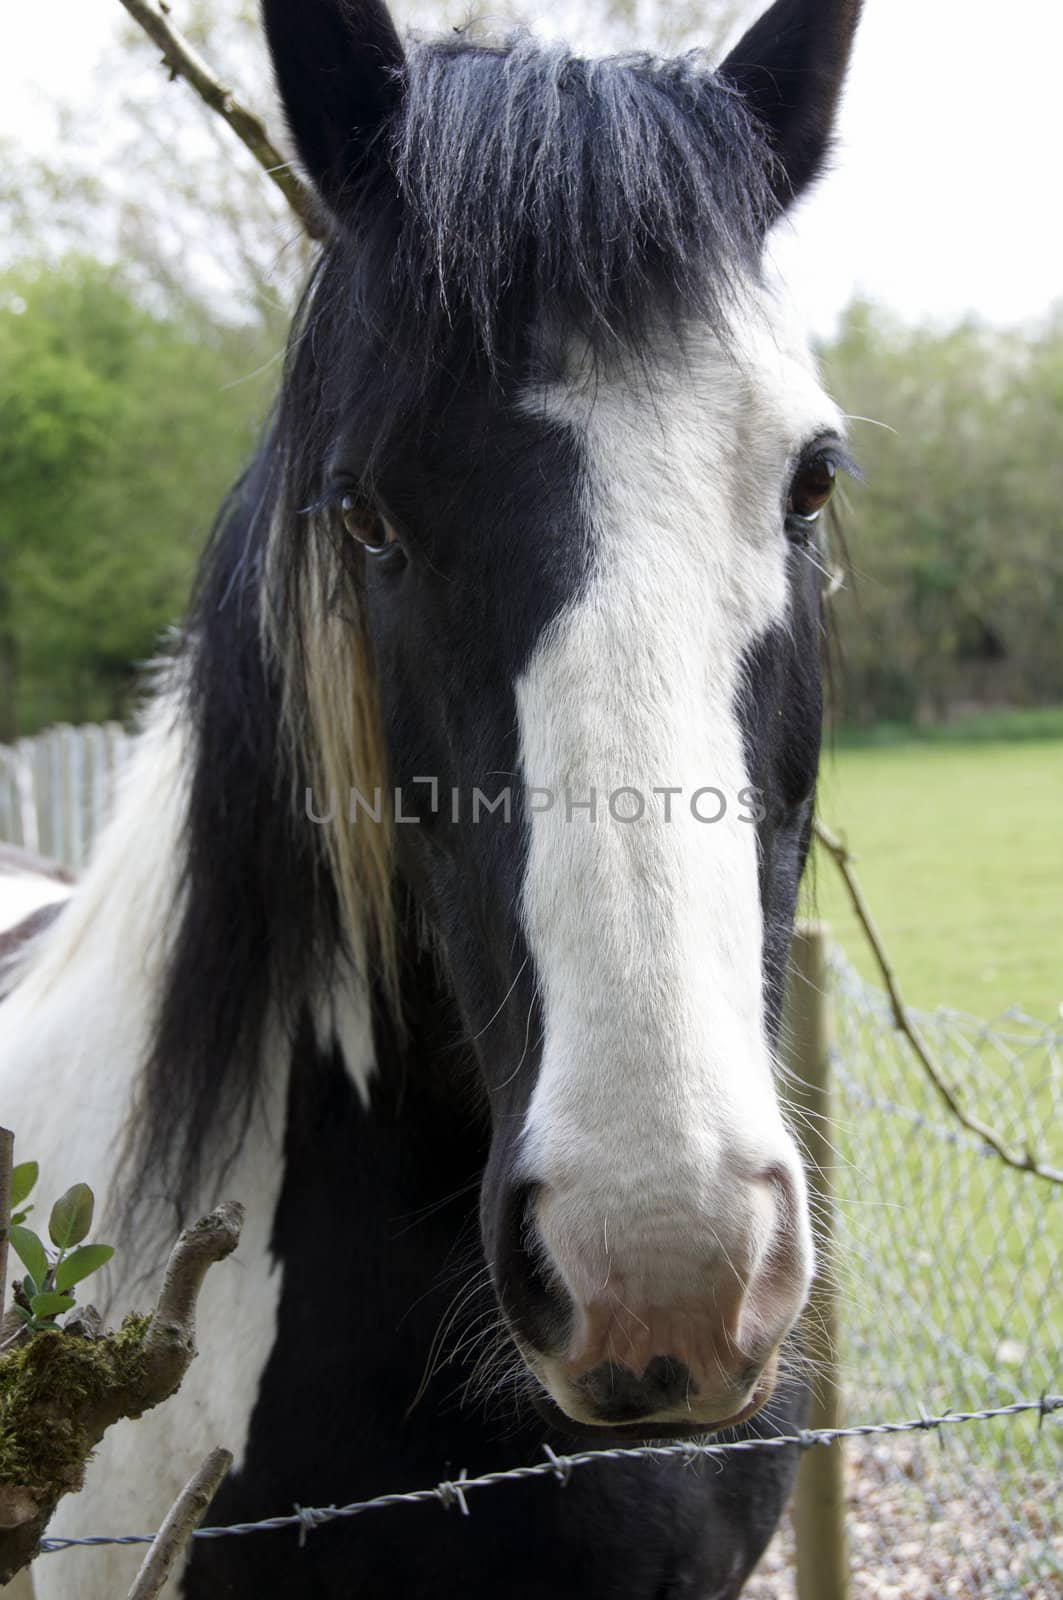 A black and white horse looking over a fence